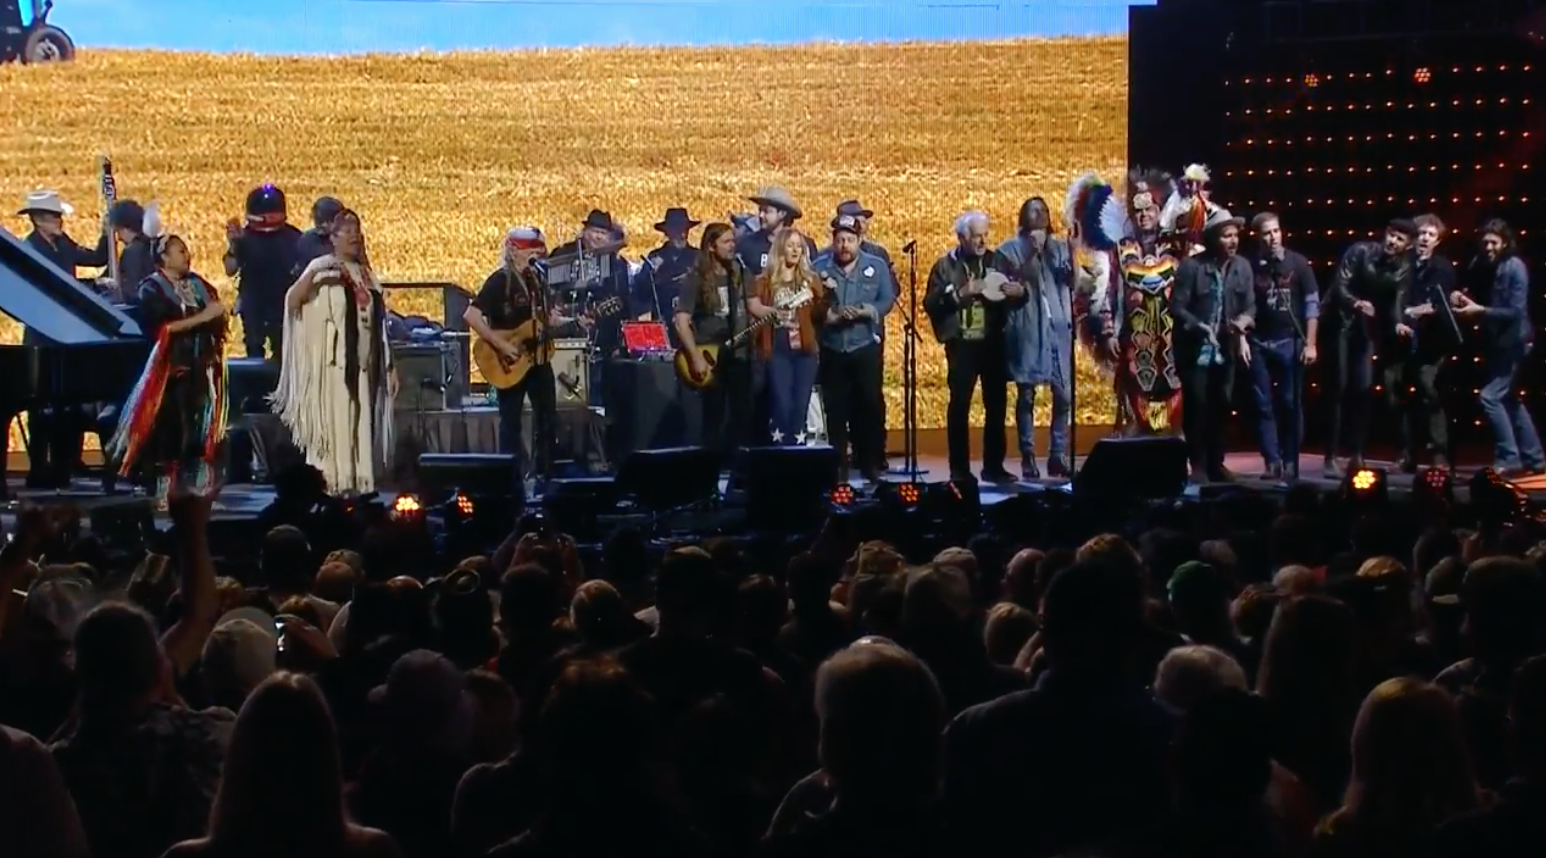 Watch Full Performances from Willie Nelson, Neil Young, Dave Matthews and More at Farm Aid 2018